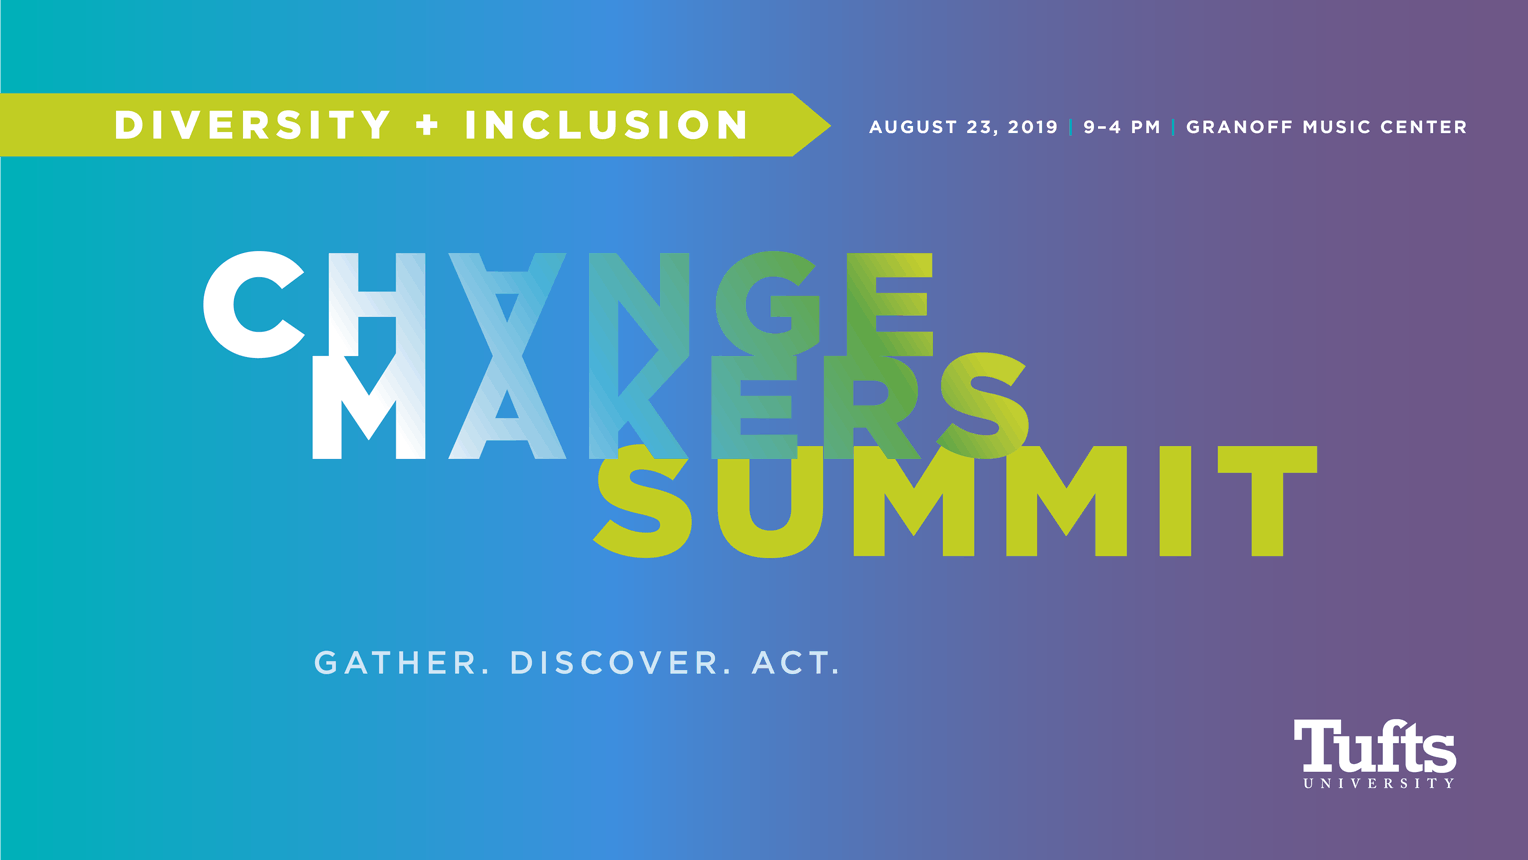 Tufts University Changemakers Summit: Diversity & Inclusion